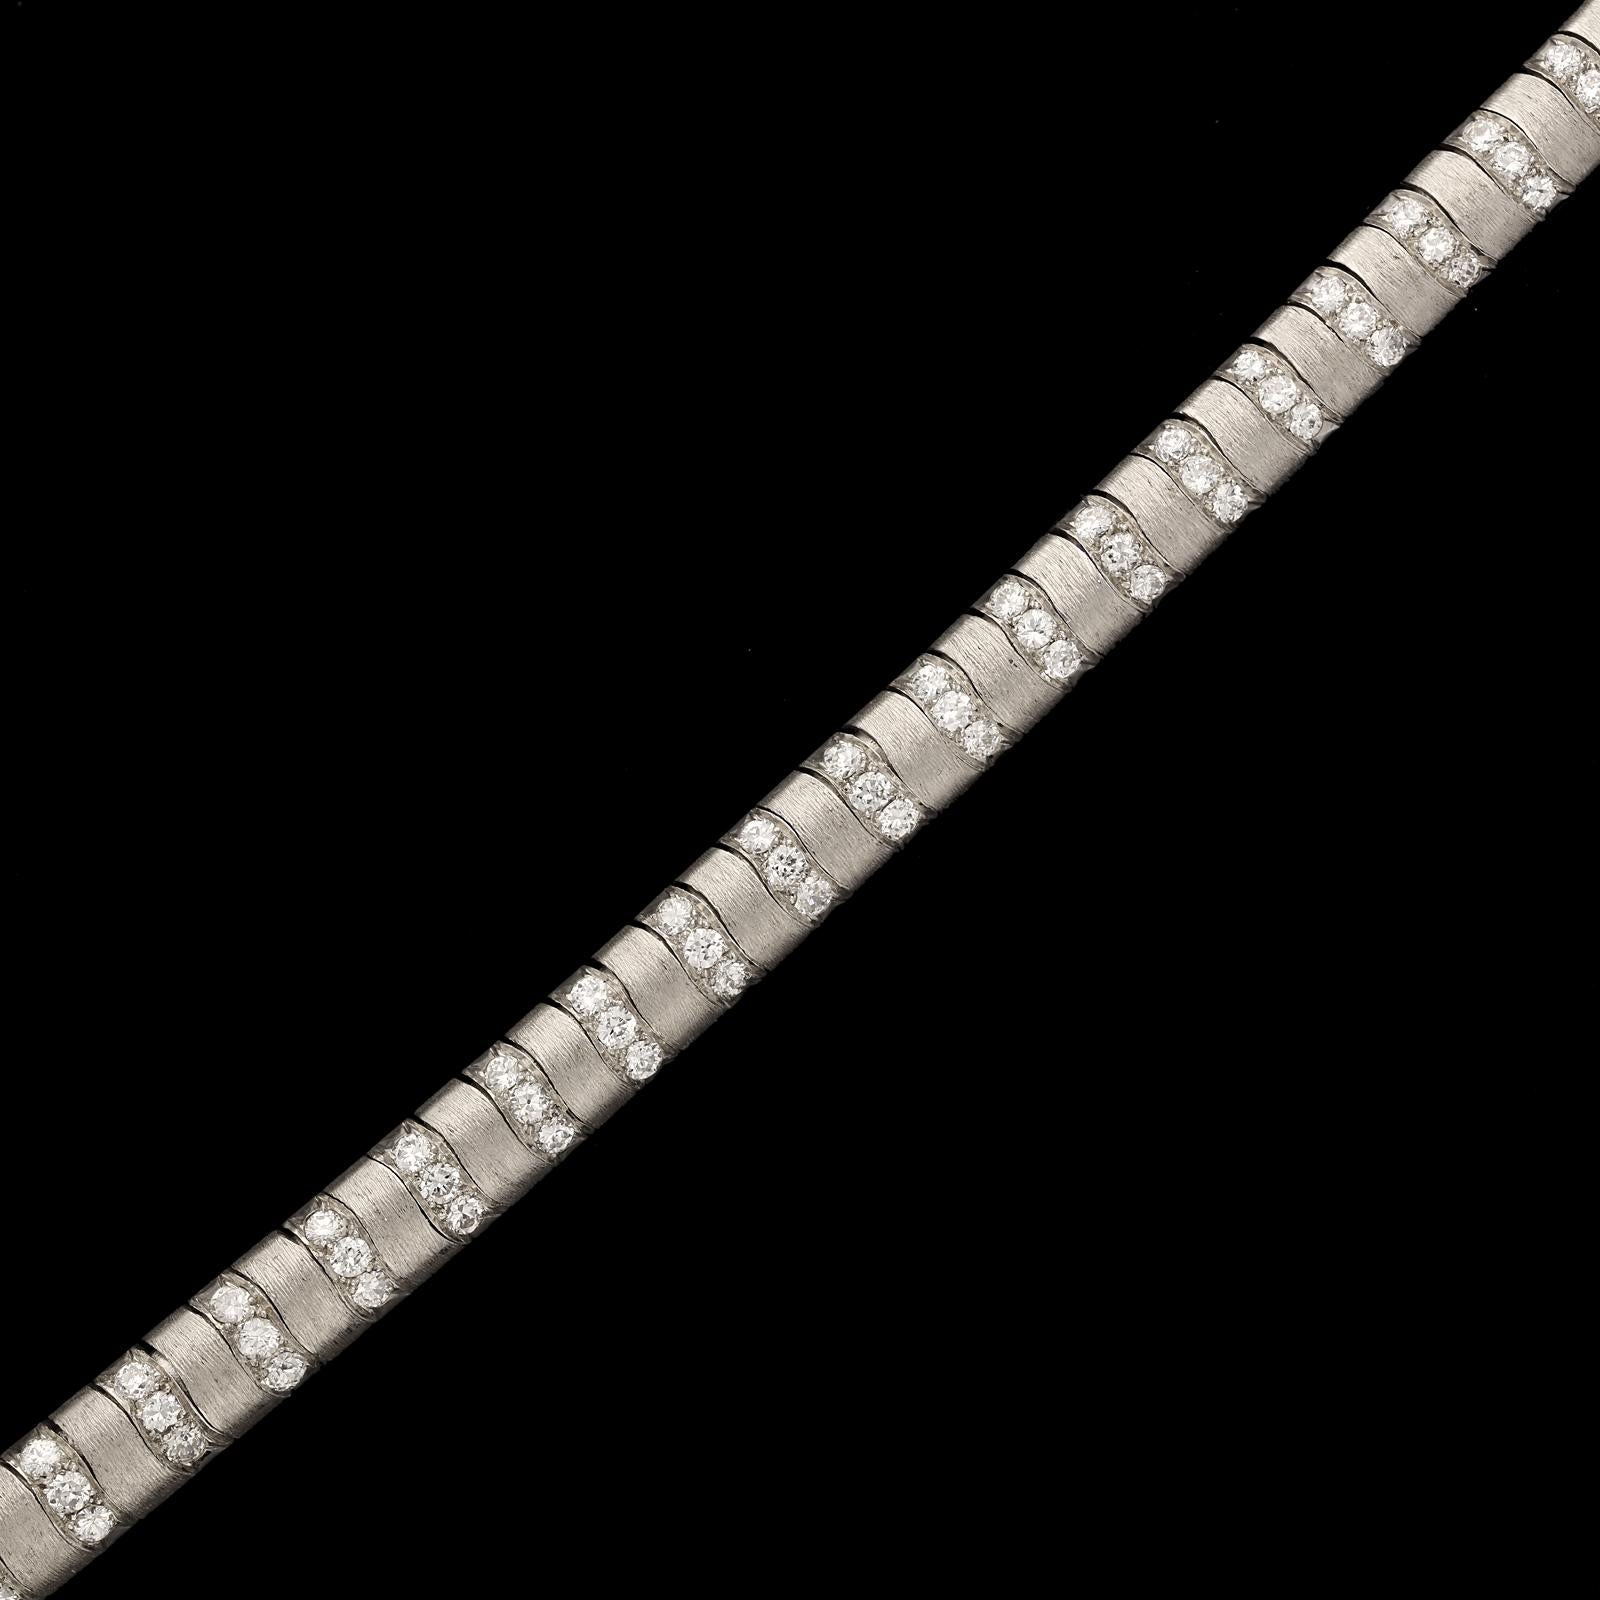 A striking and unusual platinum and diamond necklace by Van Cleef and Arpels c.1942, the articulated necklace made in platinum with a straight ribbon form and double domed profile, set across at regular intervals with sixty-three inlaid rows of